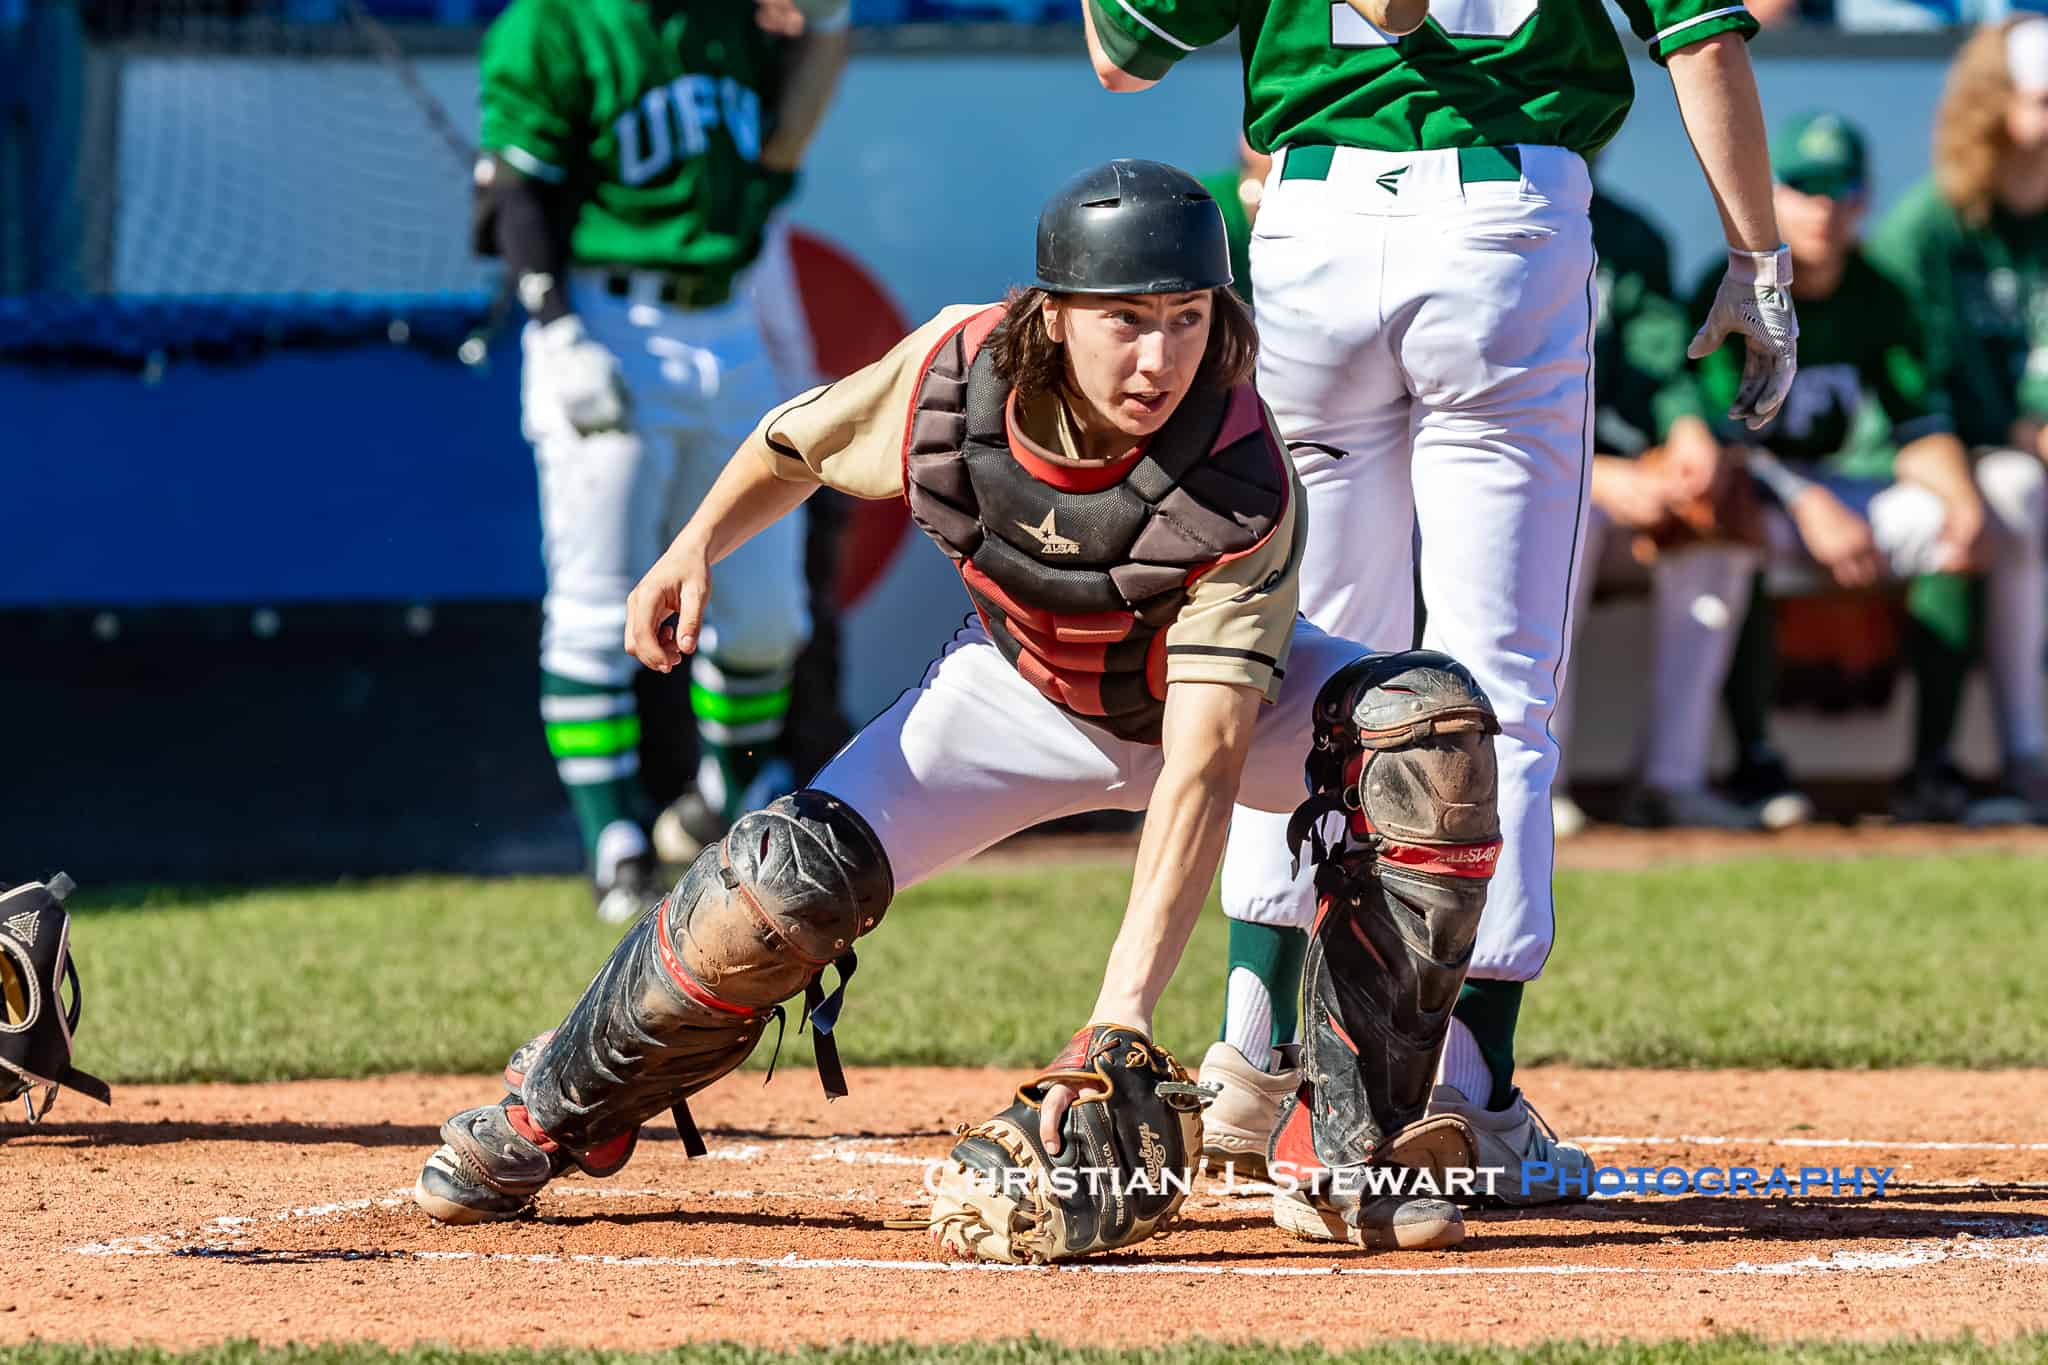 Low Tide, Mid-Tide, Victoria suffers loss, gains tie, in doubleheader against Cascades